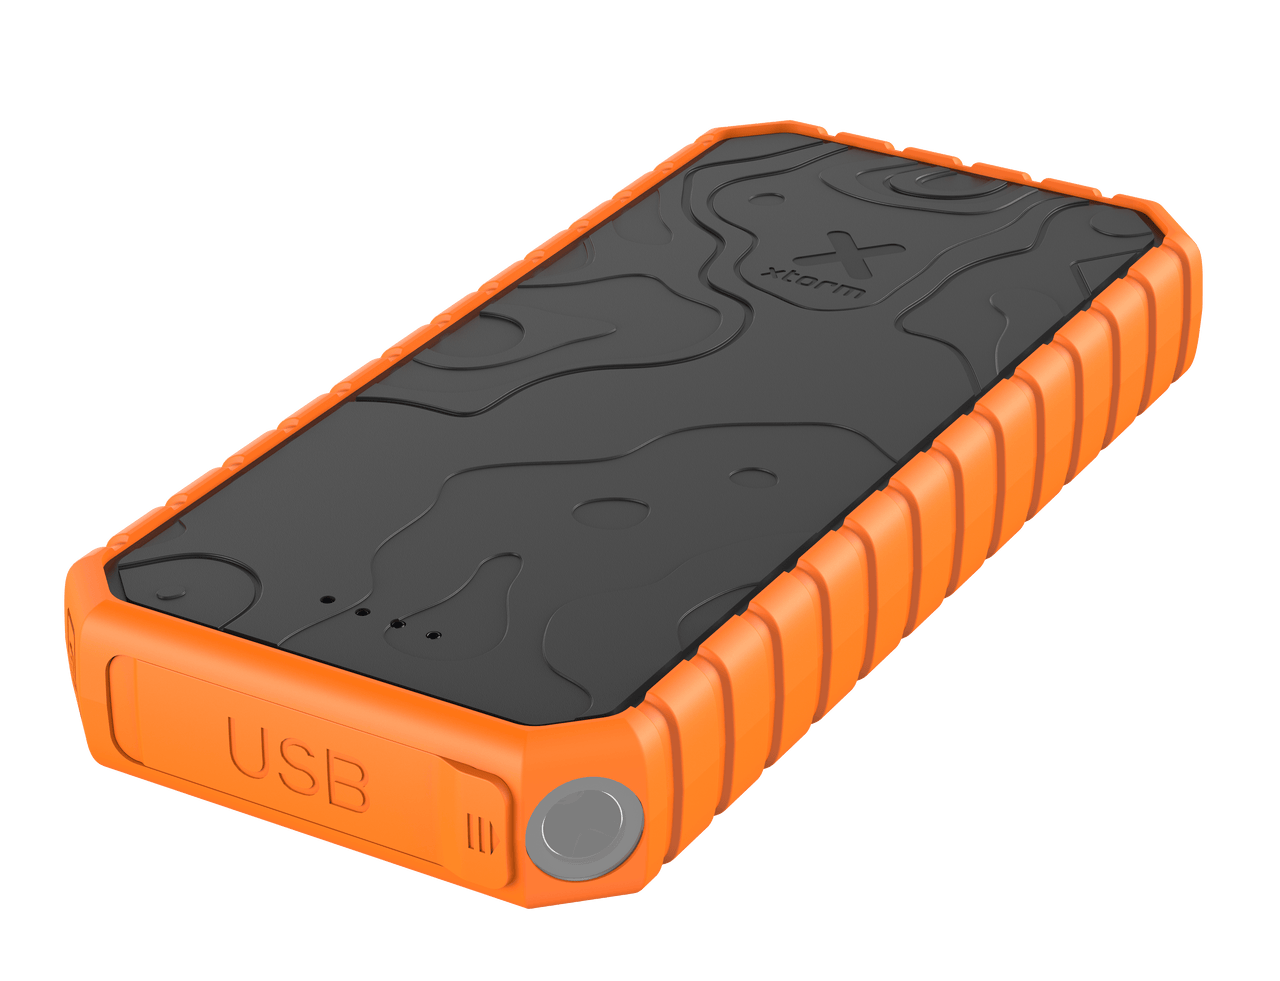 Xtreme Powerbank Rugged 35W - 20.000 mAh - Outdoor - Waterdicht met zaklamp - Quick Charge 3.0 - Xtorm NL